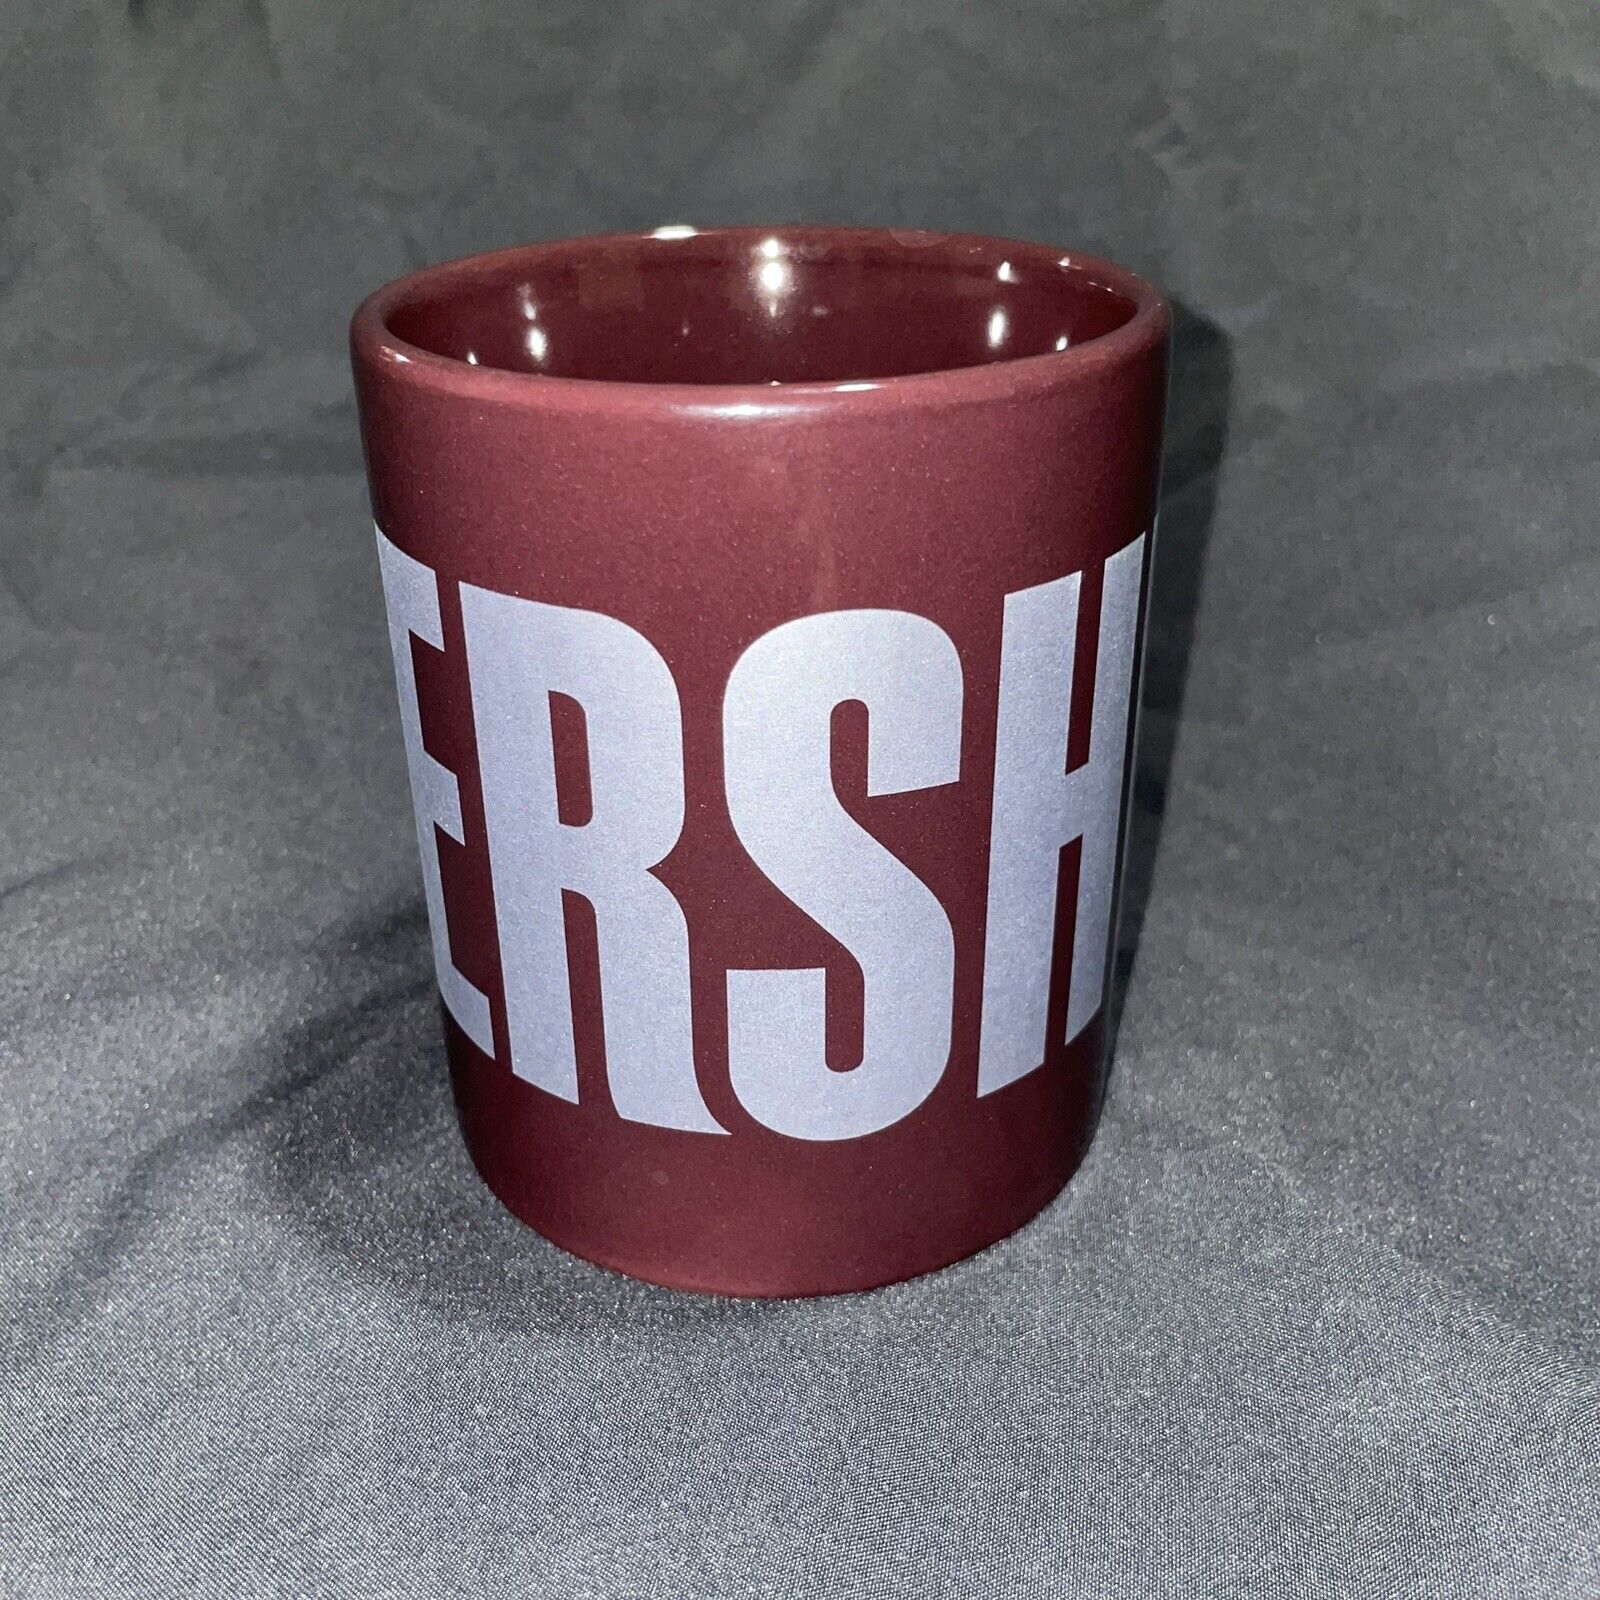 Hershey's Chocolate Since 1894 Ceramic Coffee Cup Mug Galerie VG Condition